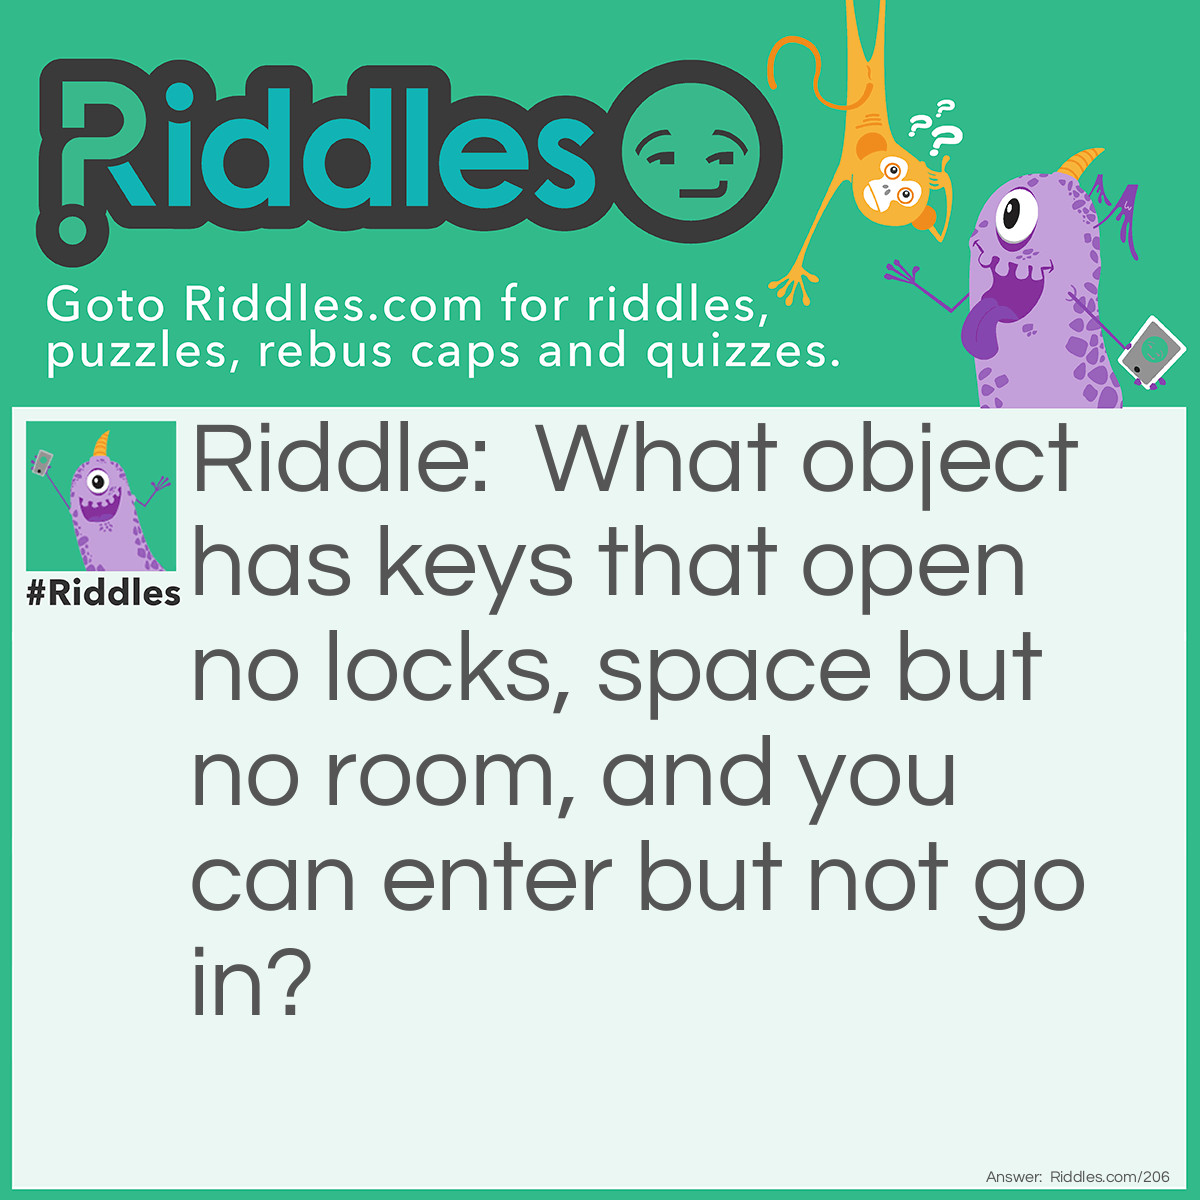 Riddle: What object has keys that open no locks, space but no room, and you can enter but not go in? Answer: A computer keyboard.